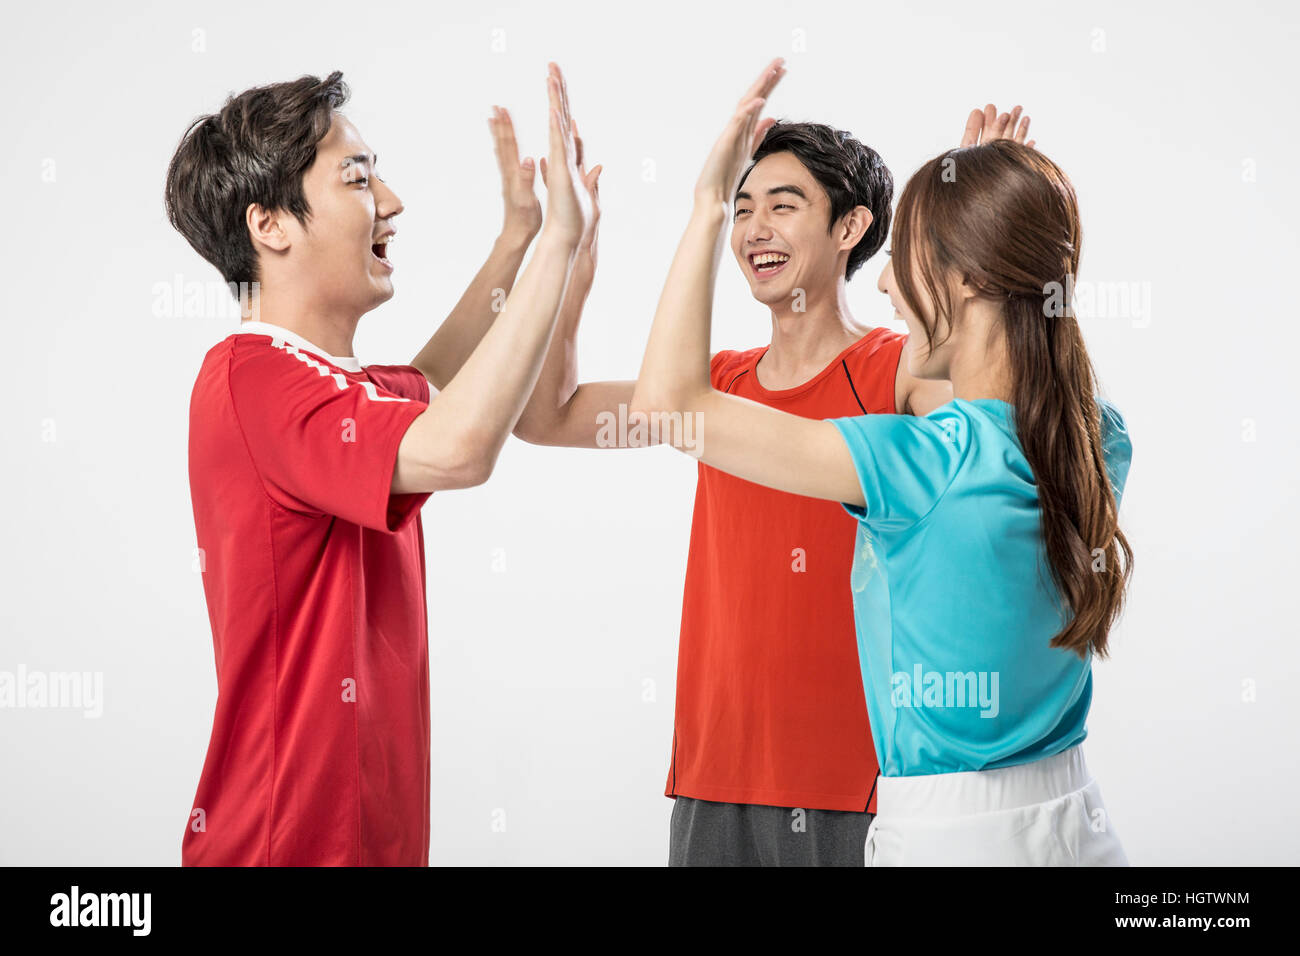 Young smiling sports players slapping high fives Stock Photo